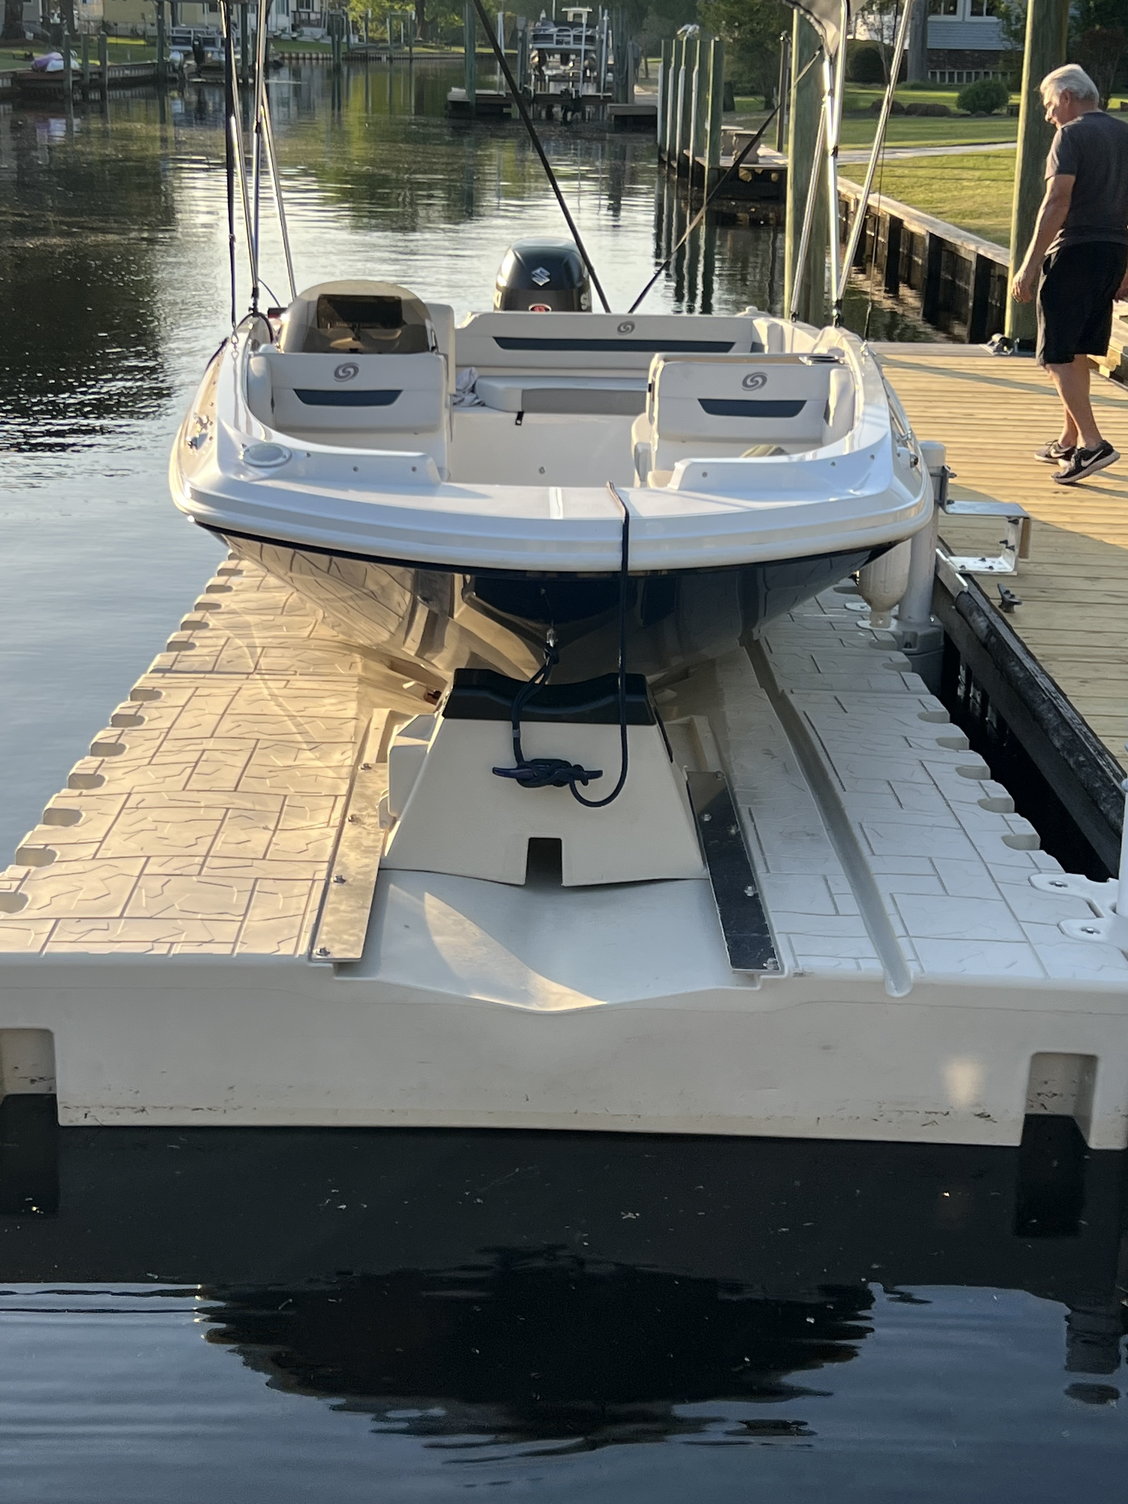 Floating drive in dock - The Hull Truth - Boating and Fishing Forum